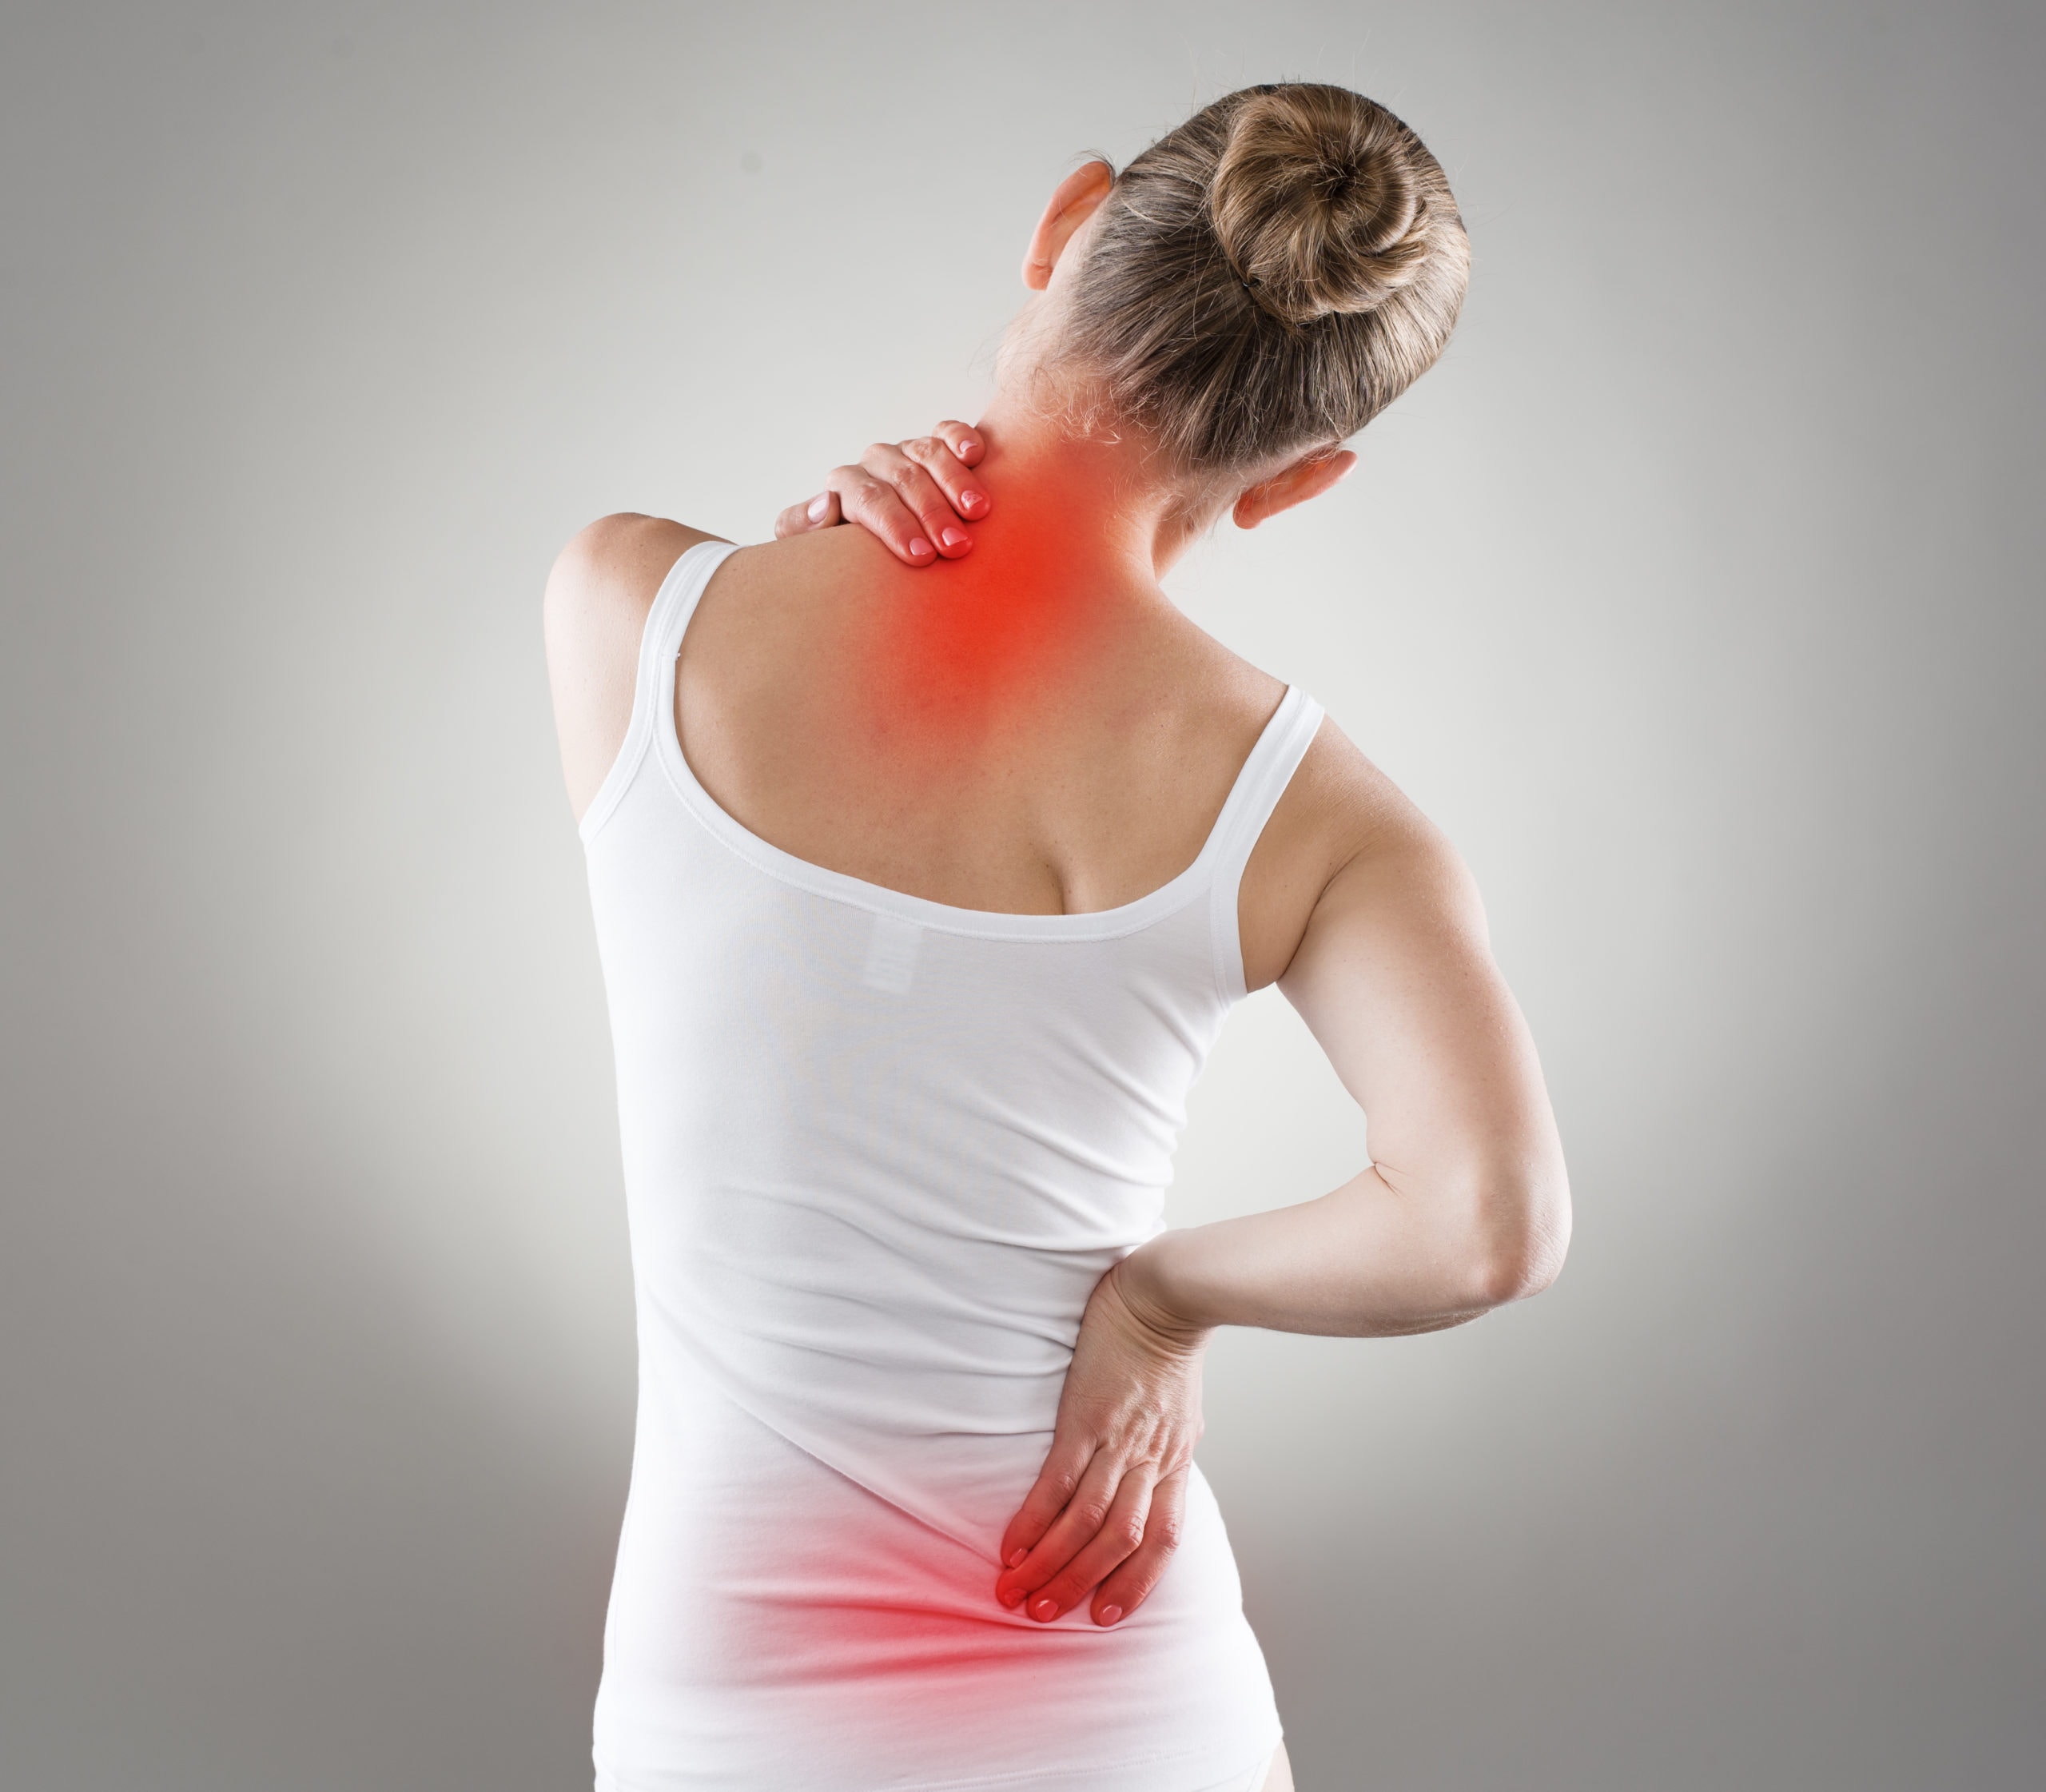 The Role of Chiropractic Care in Preventing and Managing Chronic Back and Neck Pain